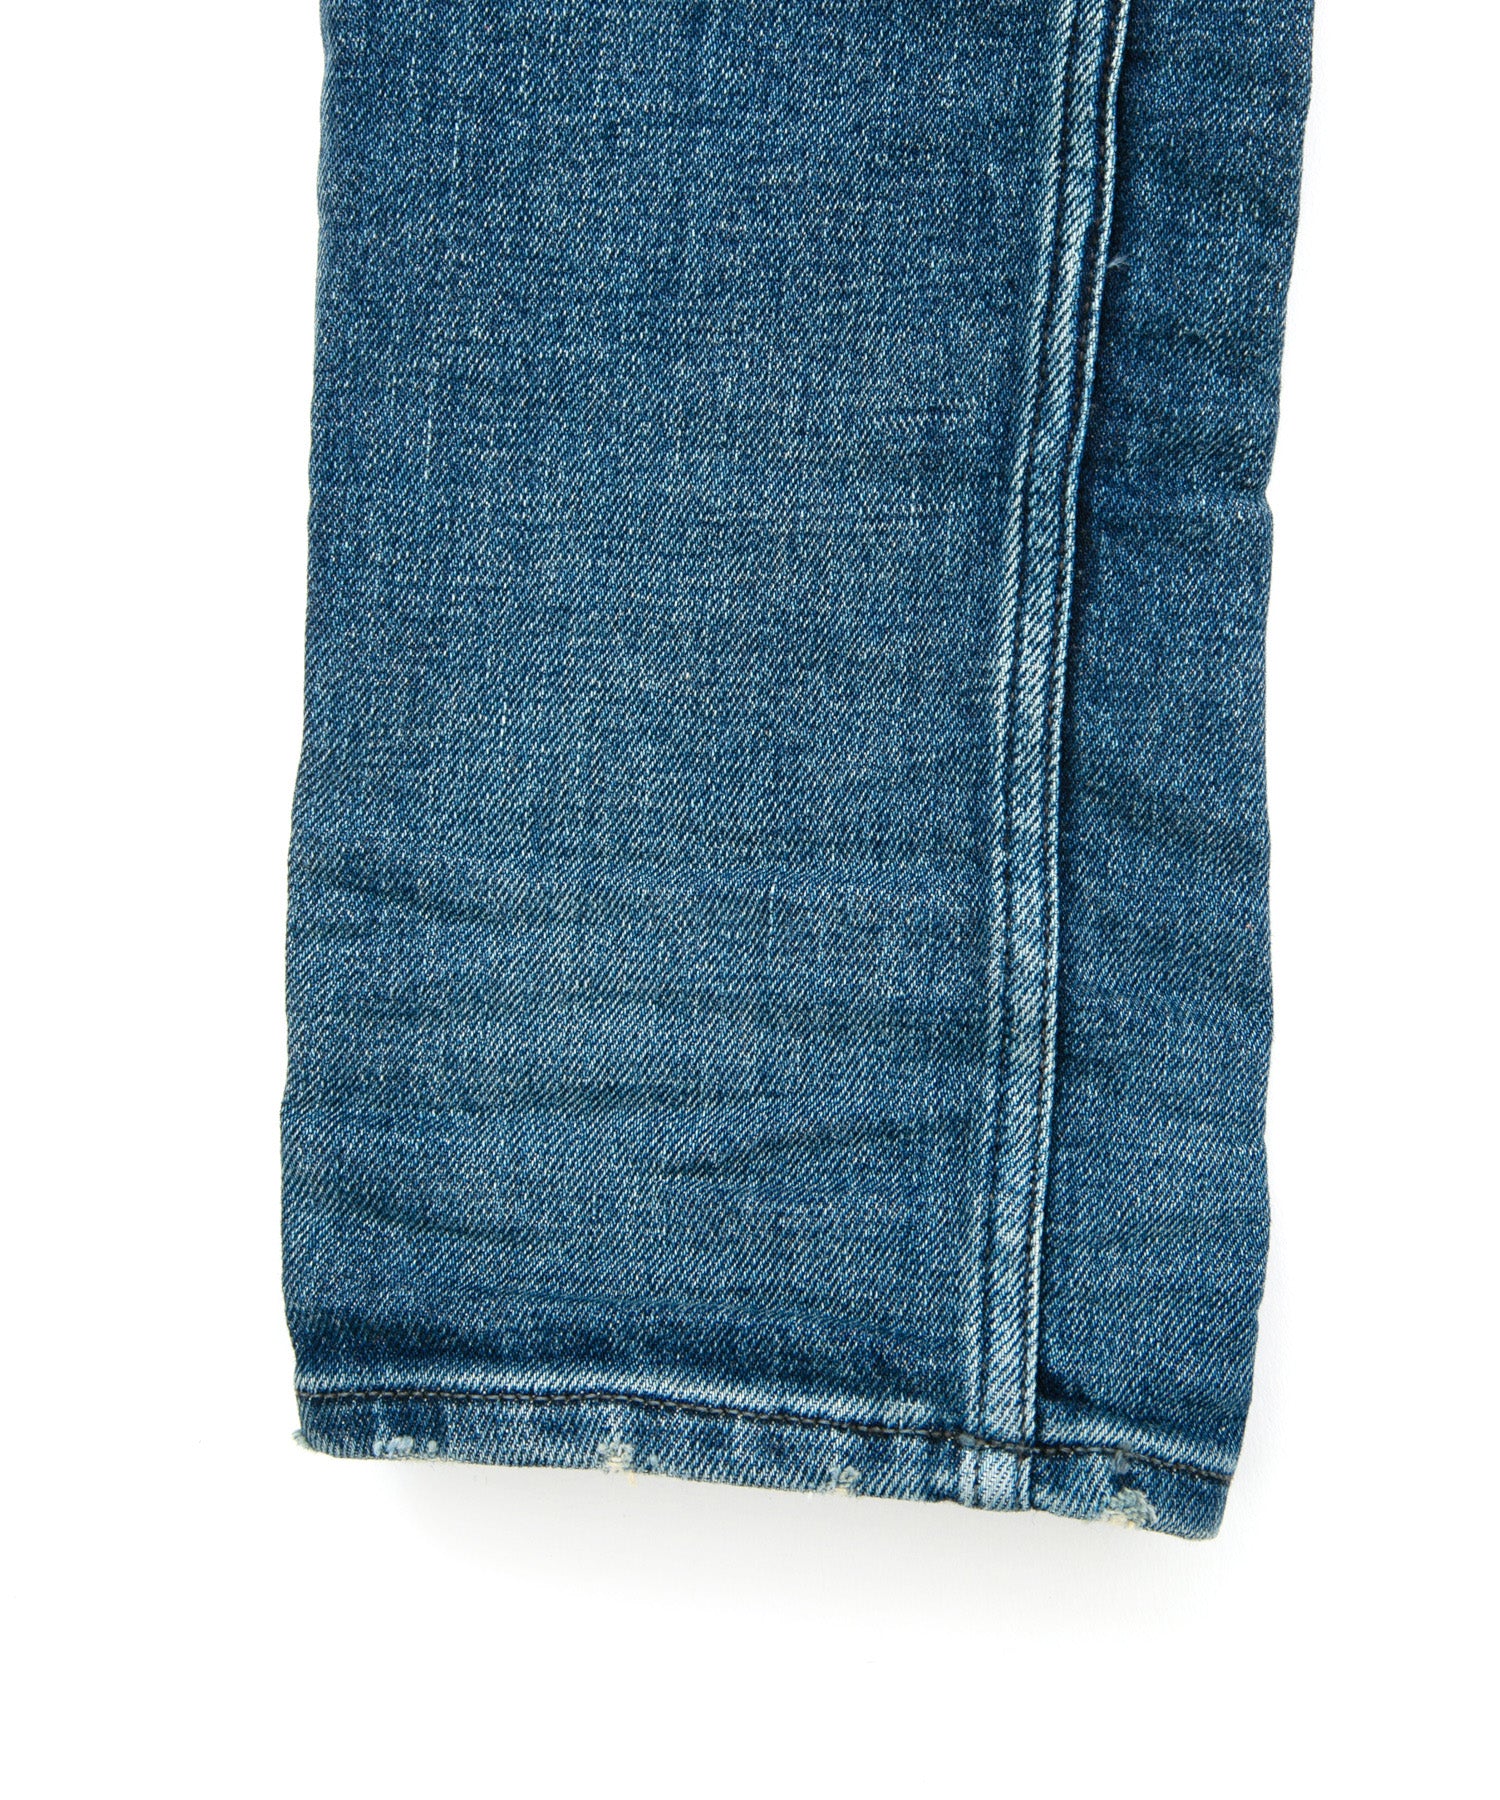 Load image into Gallery viewer, 12.5oz Organic Cotton Stretch Denim Skinny Jeans Used Processing / INDIGO